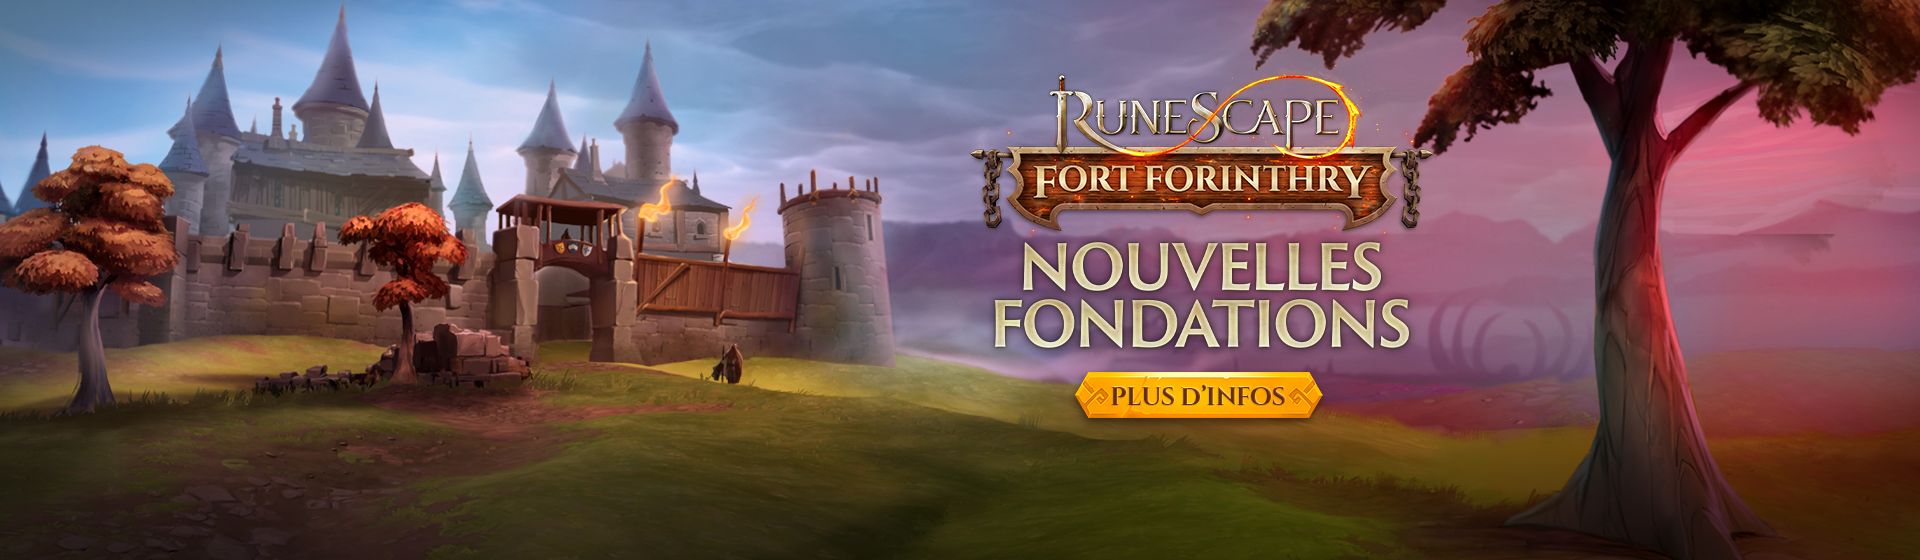 Fort Forinthry : Nouvelles fondations